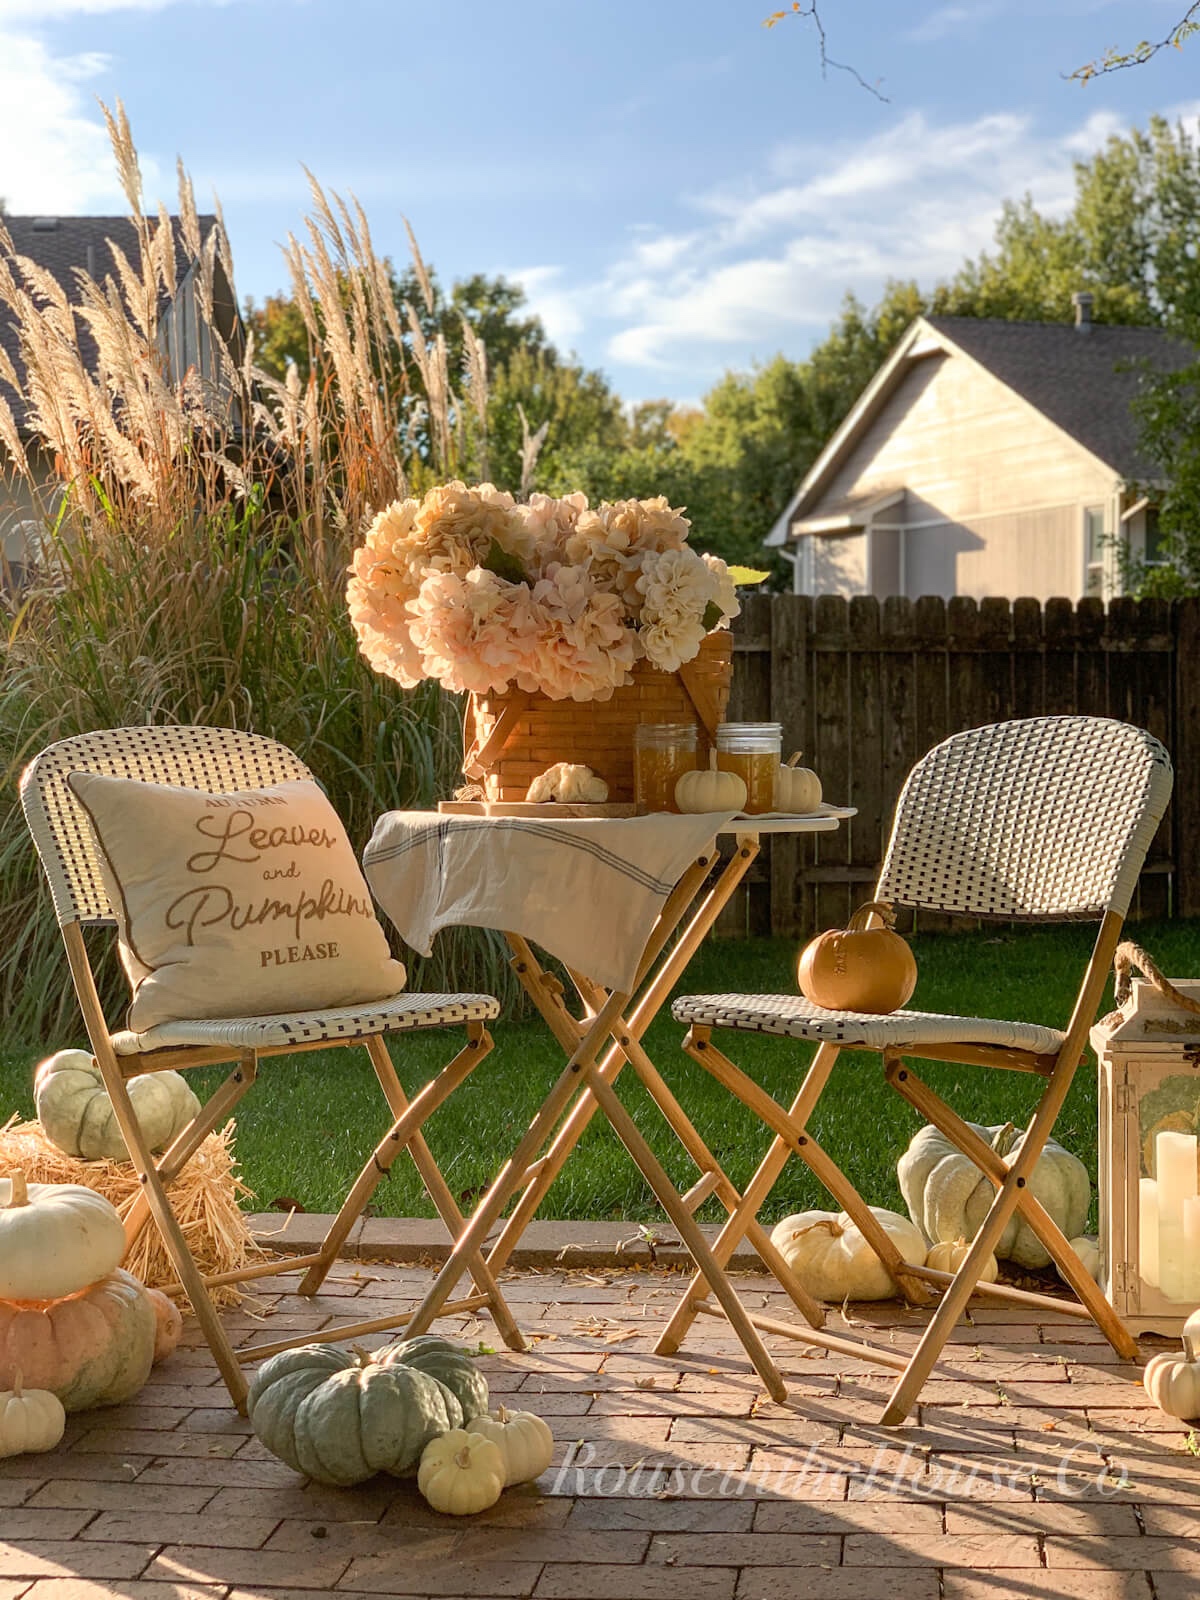 A folding bistro patio set is set up on a brick patio and set with a basket of hydrangeas, apple cider, bread and pretty pumpkins for an outdoor picnic.